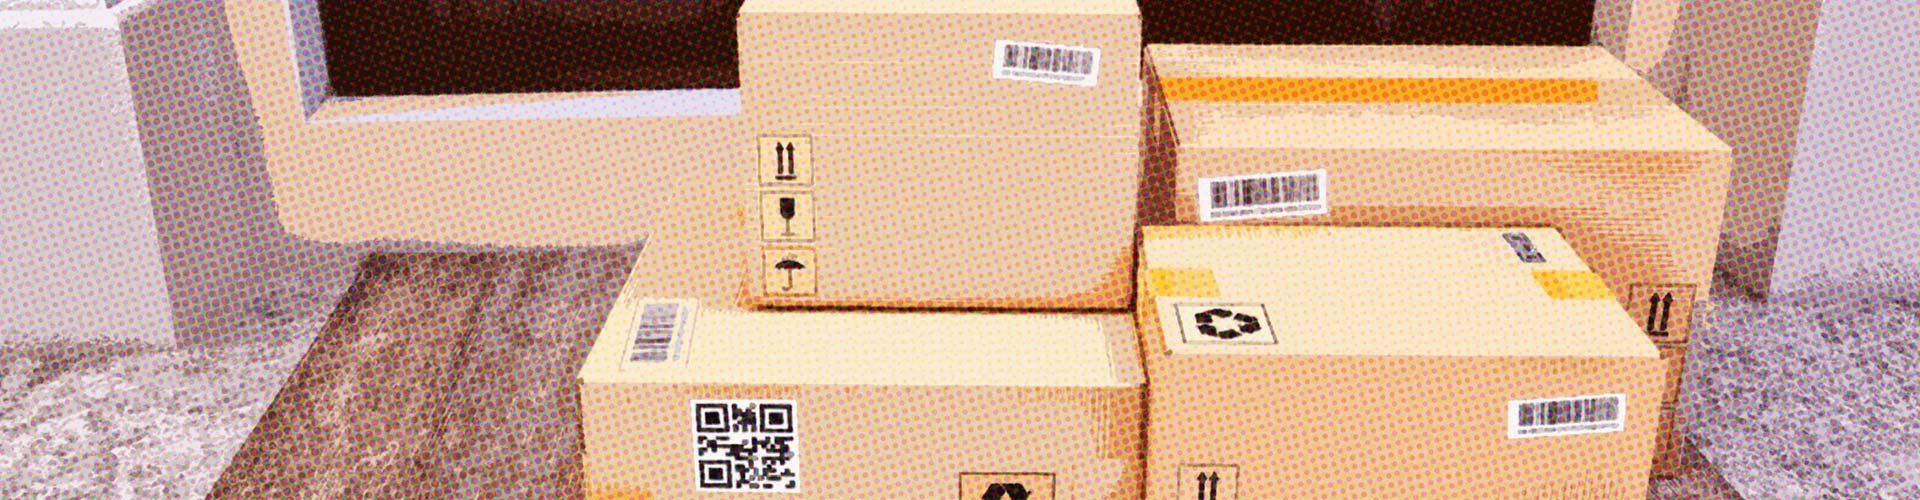 Can Retailers and Brands Meet Online Shopper Expectations? blog banner featuring stack of boxes delivered to home doorstep